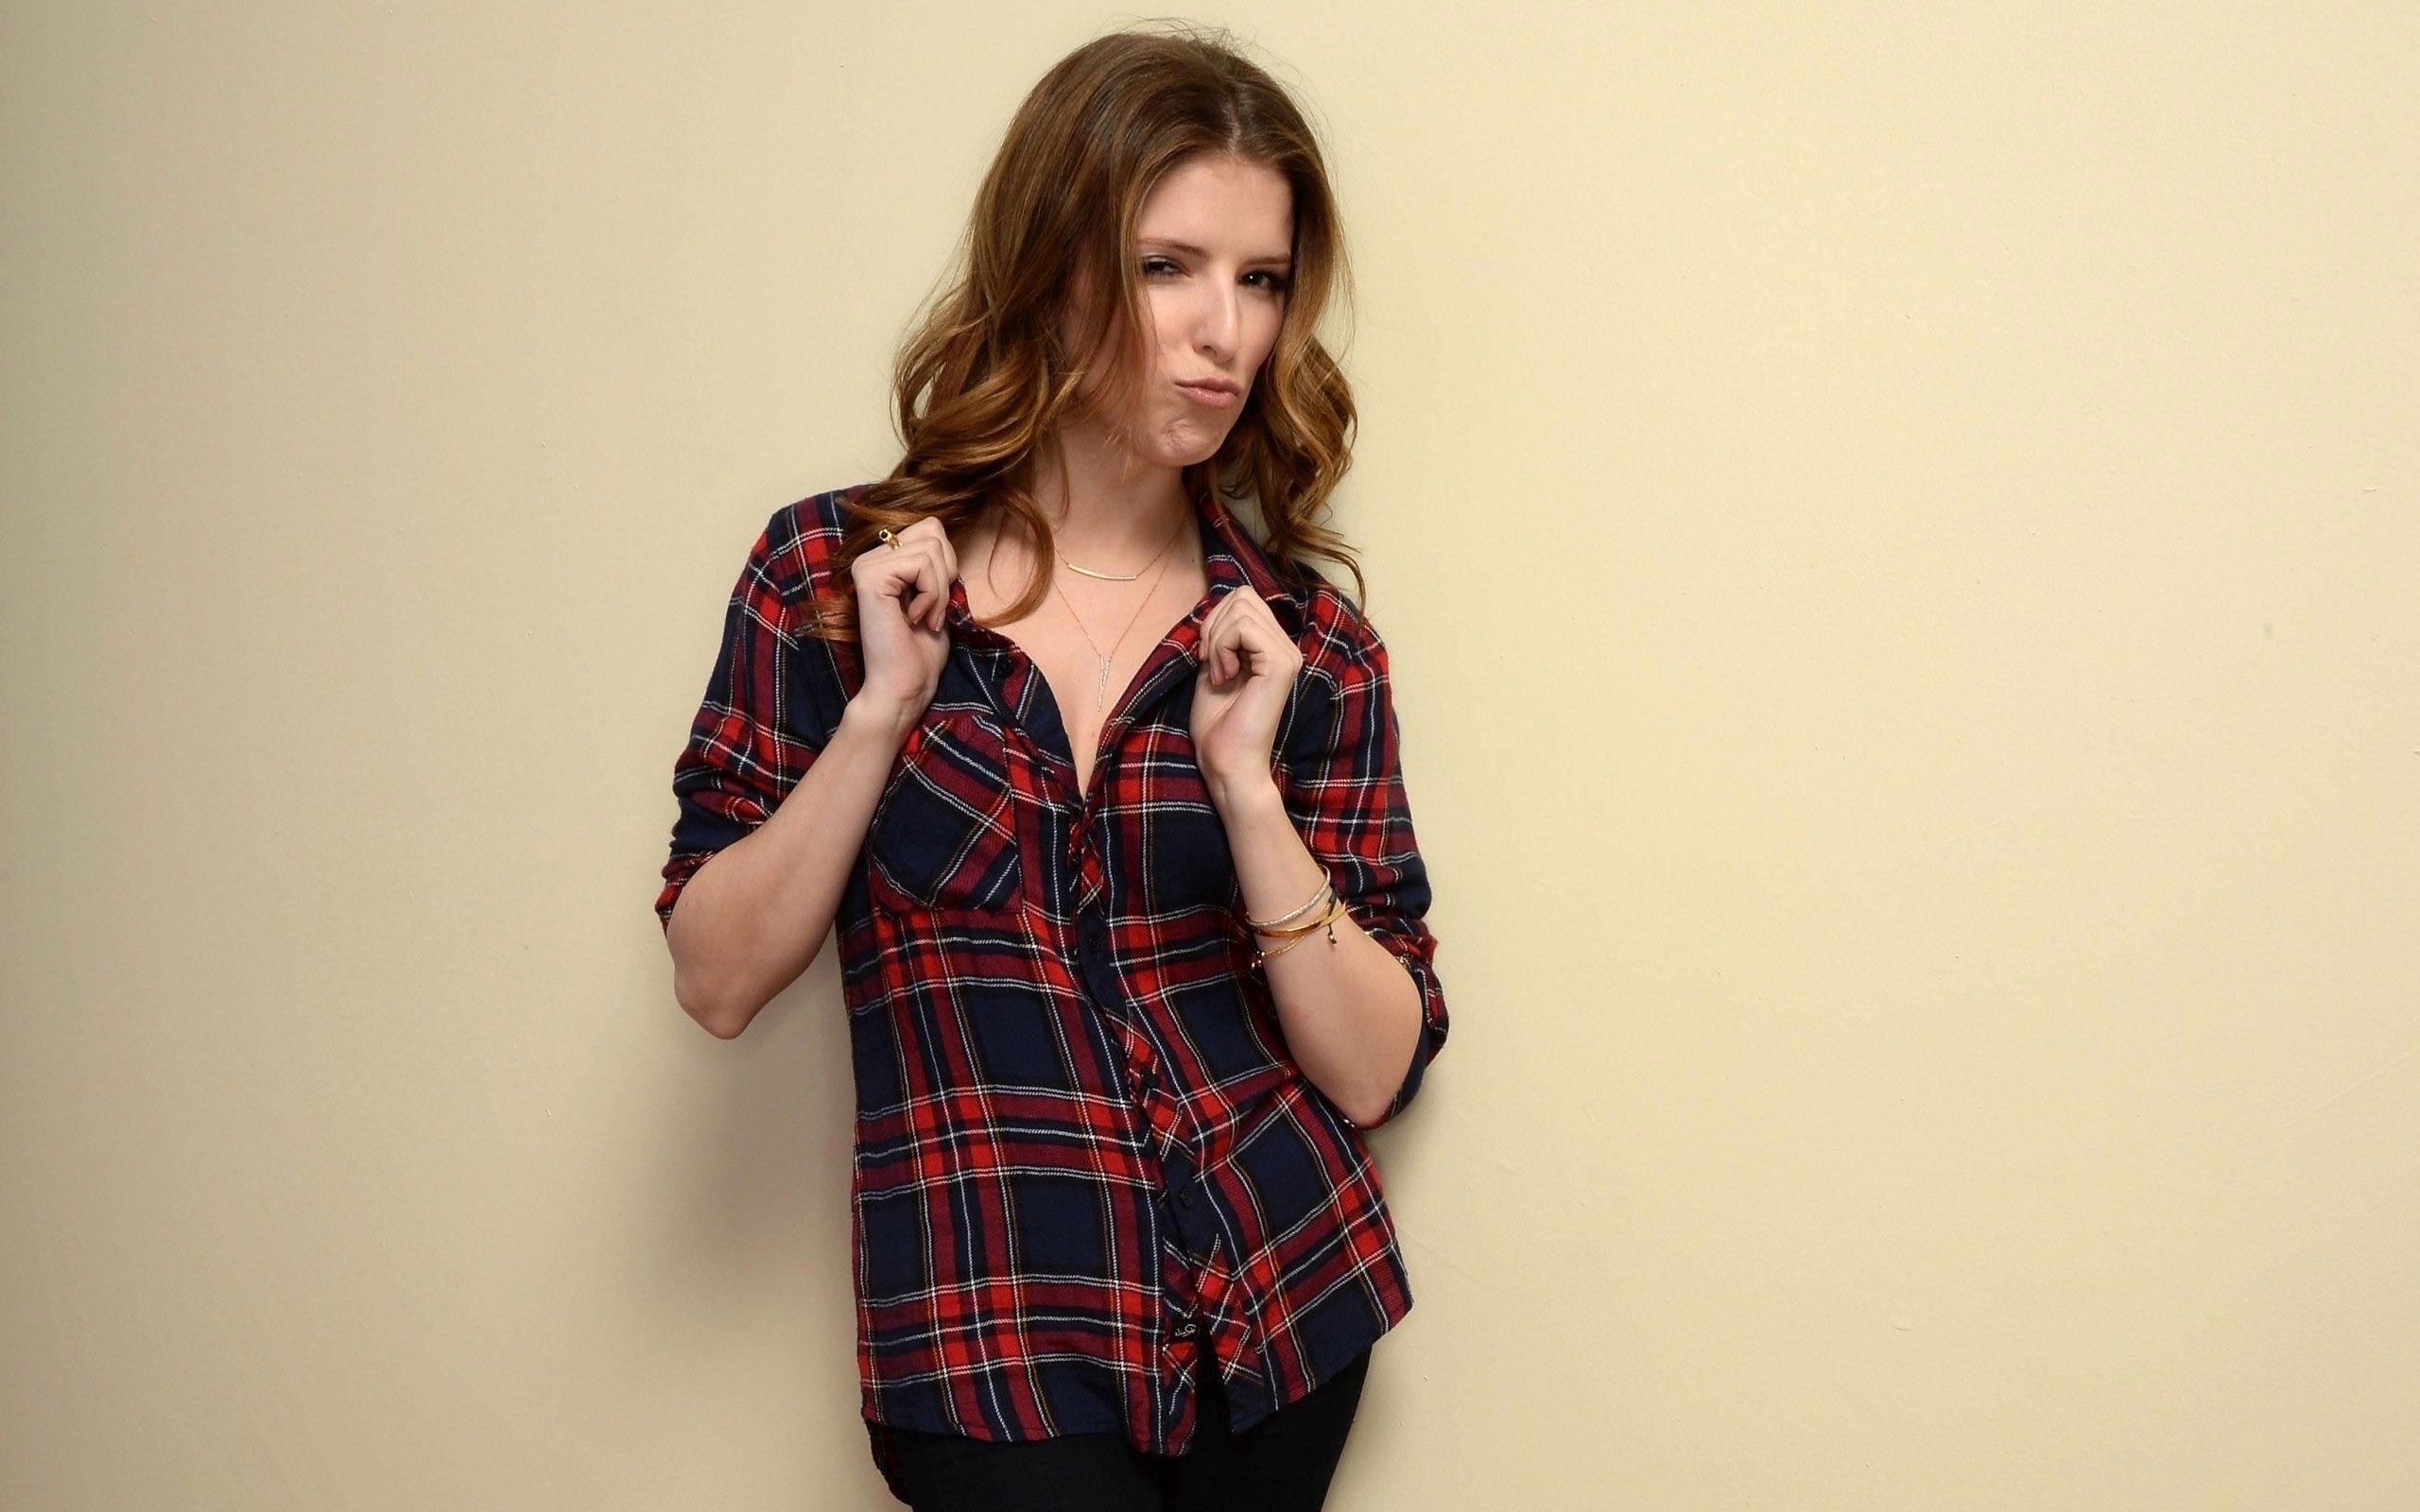 Anna Kendrick Wallpapers High Resolution And Quality - Wallpaper - HD Wallpaper 